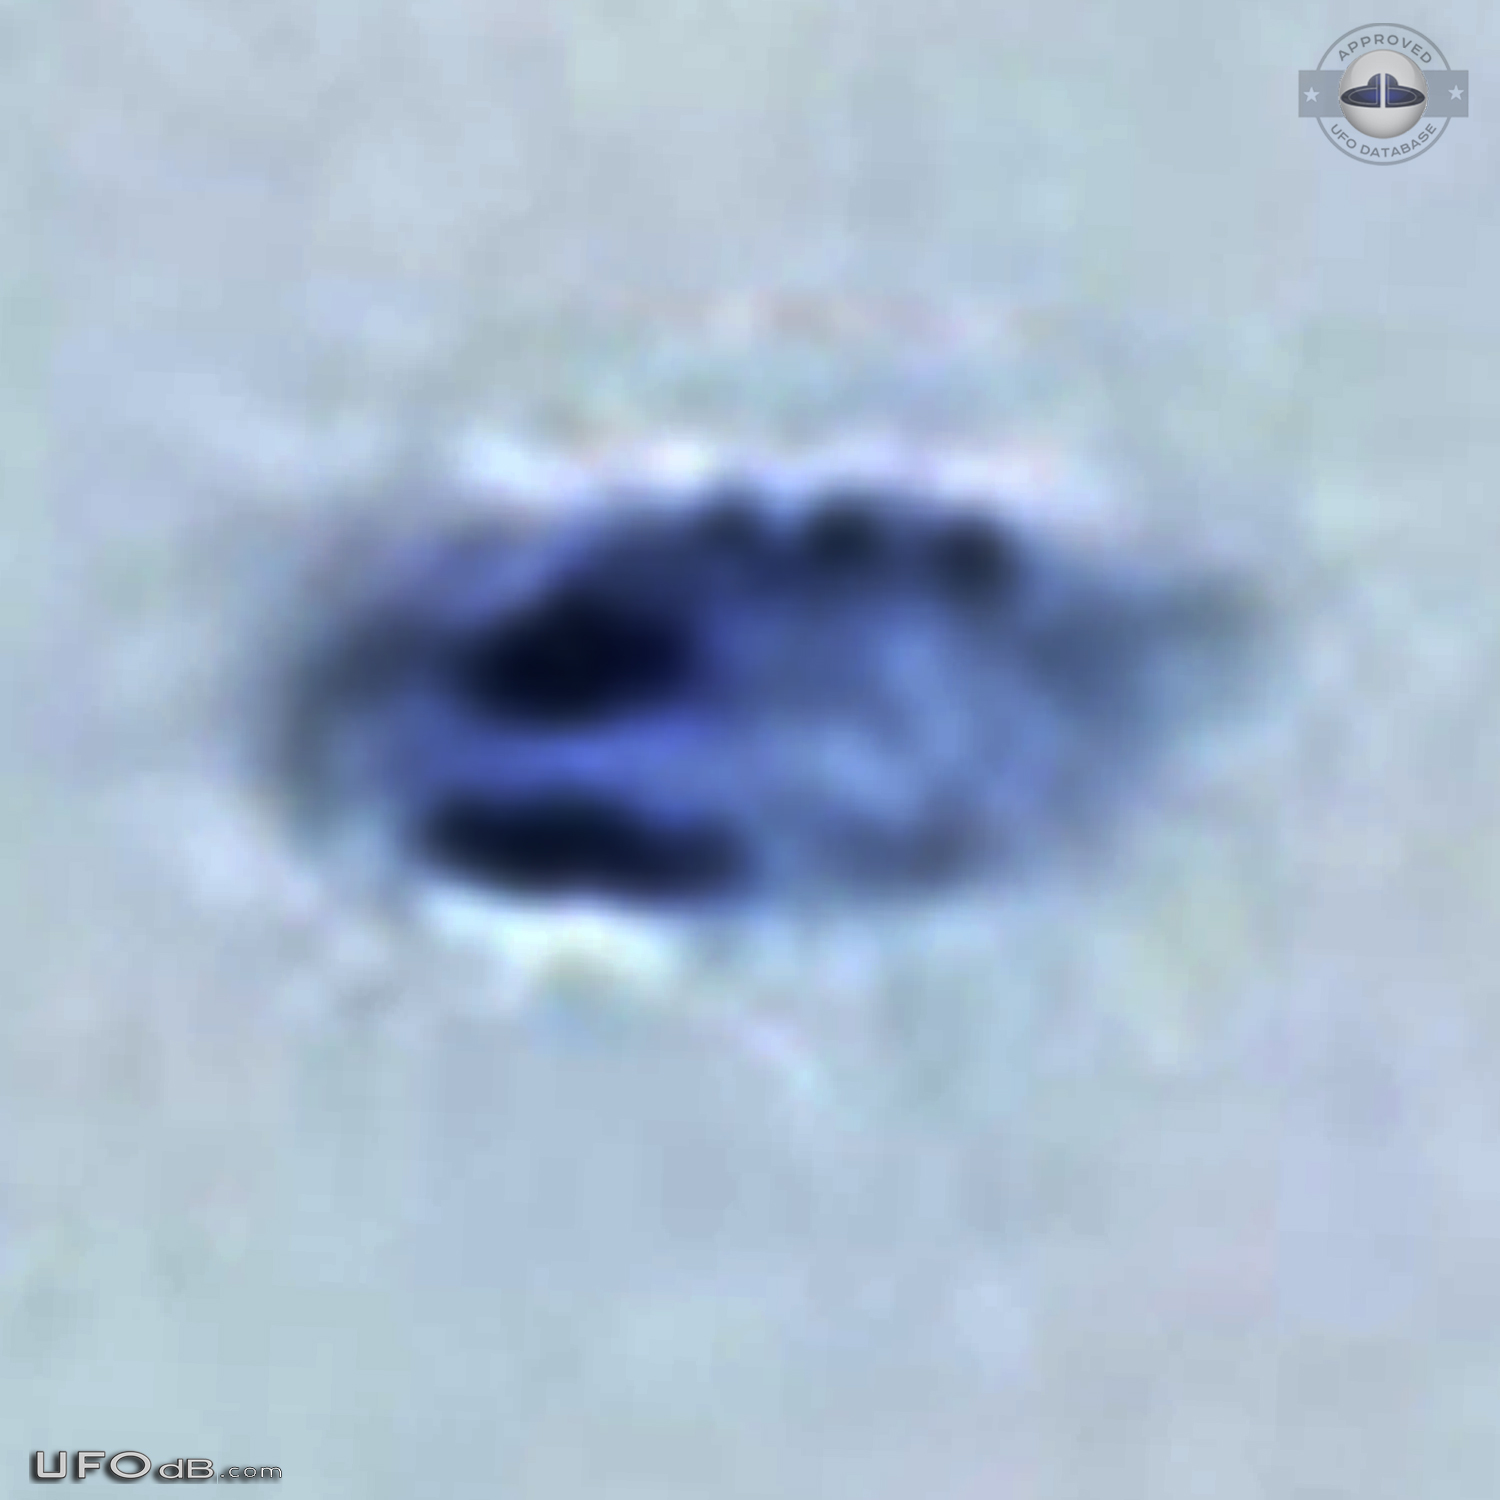 Distance UFO sighting, Appears to be circular shape - Tennessee 2014 UFO Picture #700-6